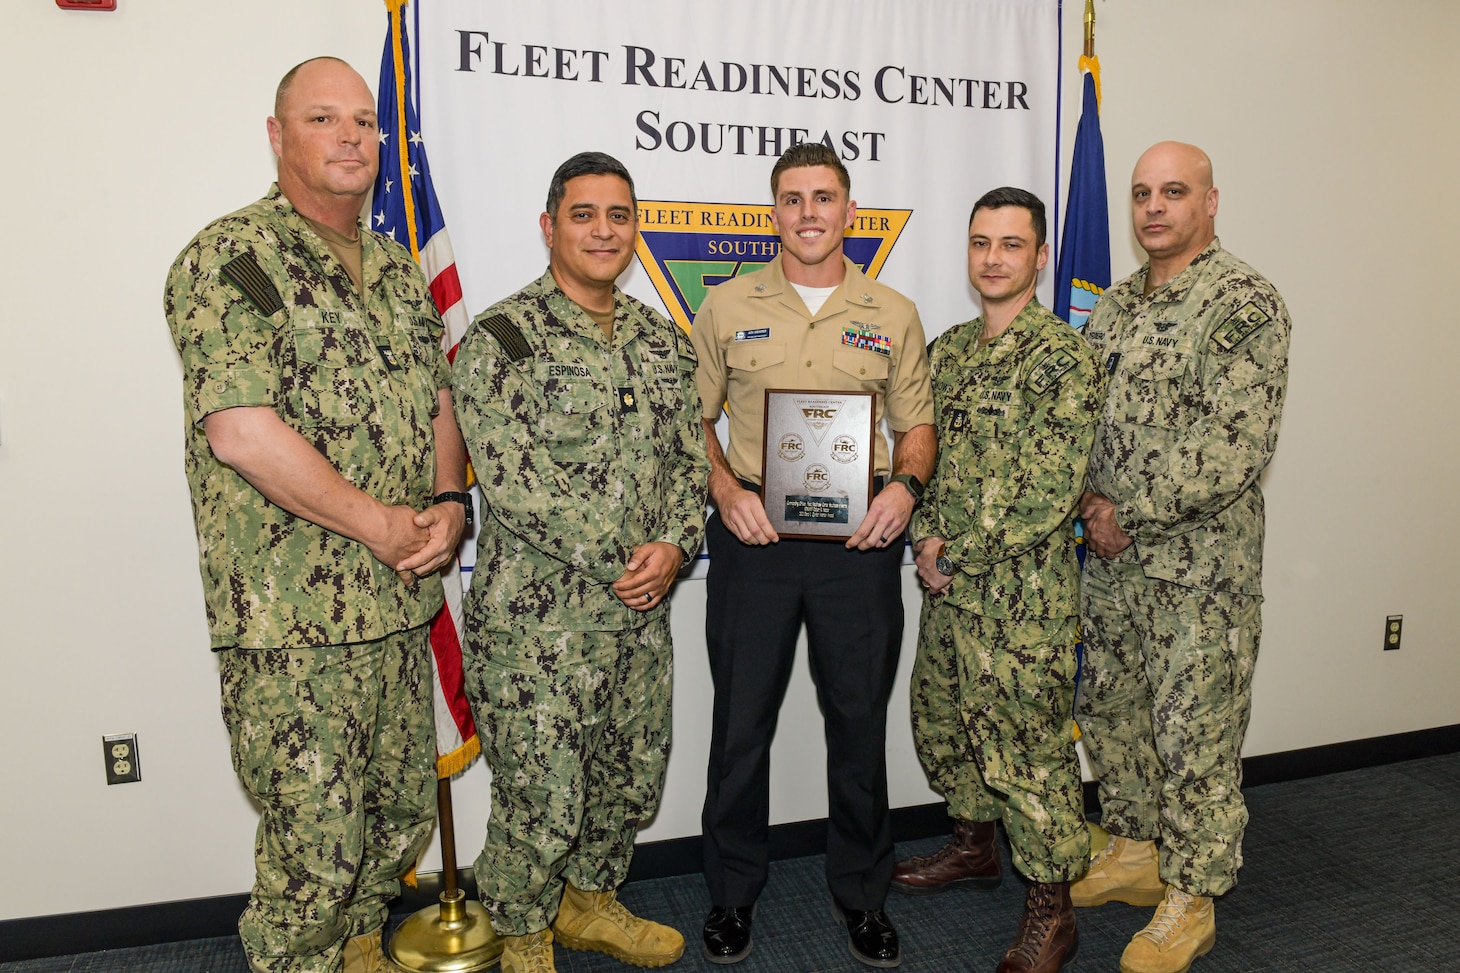 230124-N-DG679-086 
JACKSONVILLE, Fla. (Jan. 25, 2023) Petty Officer 1st Class Dalton R. Heater, assigned to Fleet Readiness Center Southeast's (FRCSE) Detachment Mayport, accepts the command's Dora Quinlan 2023 Mentor Award. The award is named after former FRCSE Business Operations Director, Dora Quinlan, who earned the first Mentor of the Year Award from Commander, Fleet Readiness Center and lost her fight with cancer in 2016. (U.S. Navy Photo by Toiete Jackson/Released)